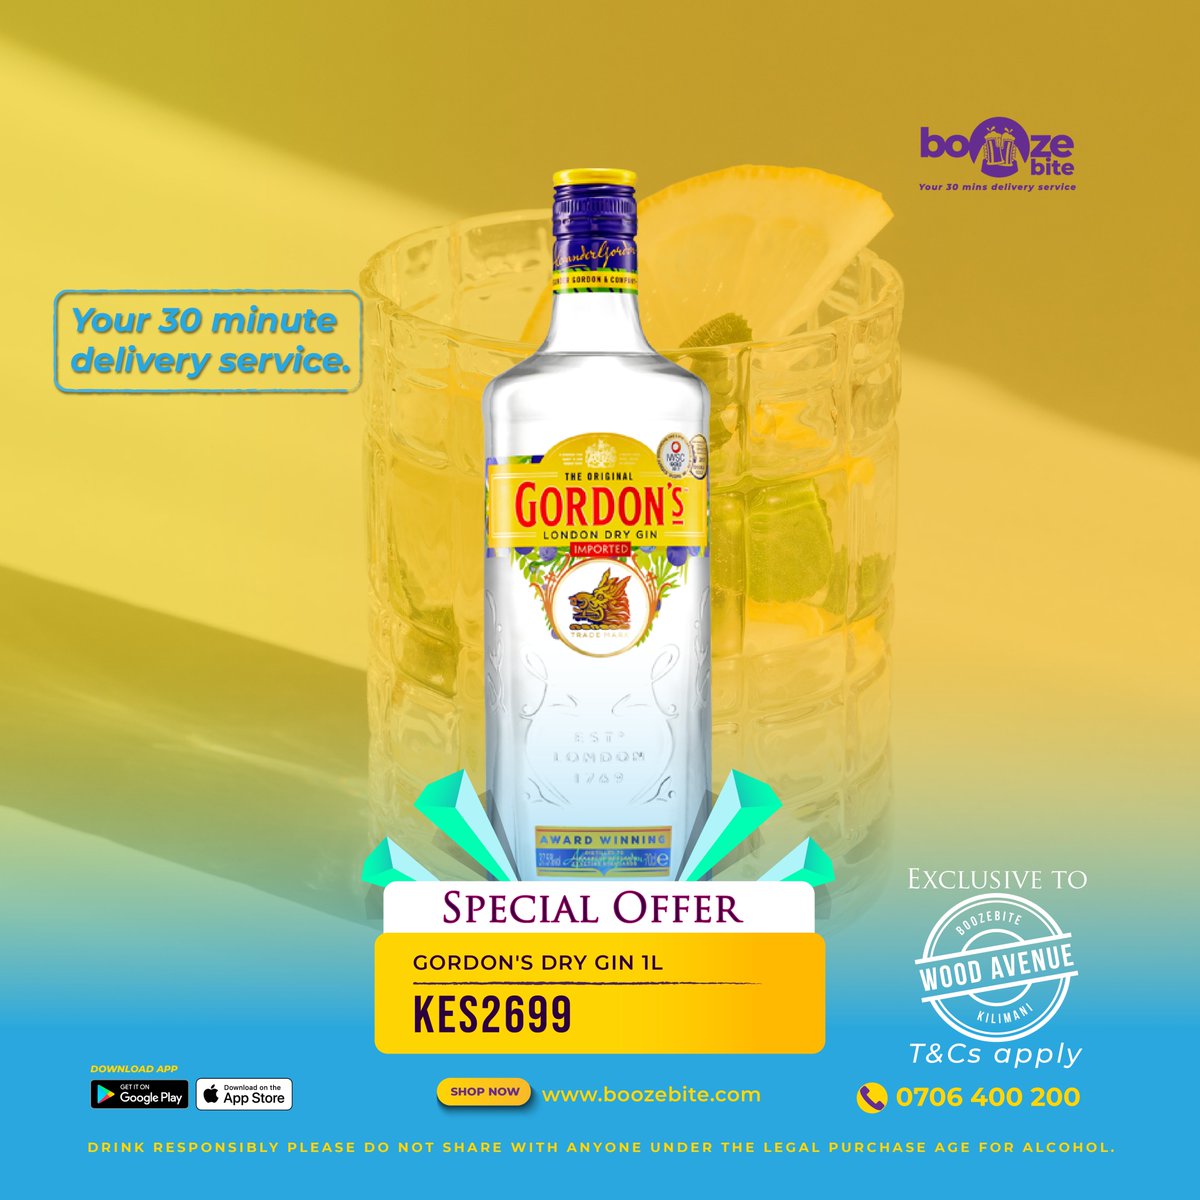 Upgrade your gin collection with Gordons gin from Boozebite. Order now and taste the difference. 

Get it at KES 500/= off on boozebite.com/shop/Kilimani_… 

#Boozebite #GordonsGin #GinLover